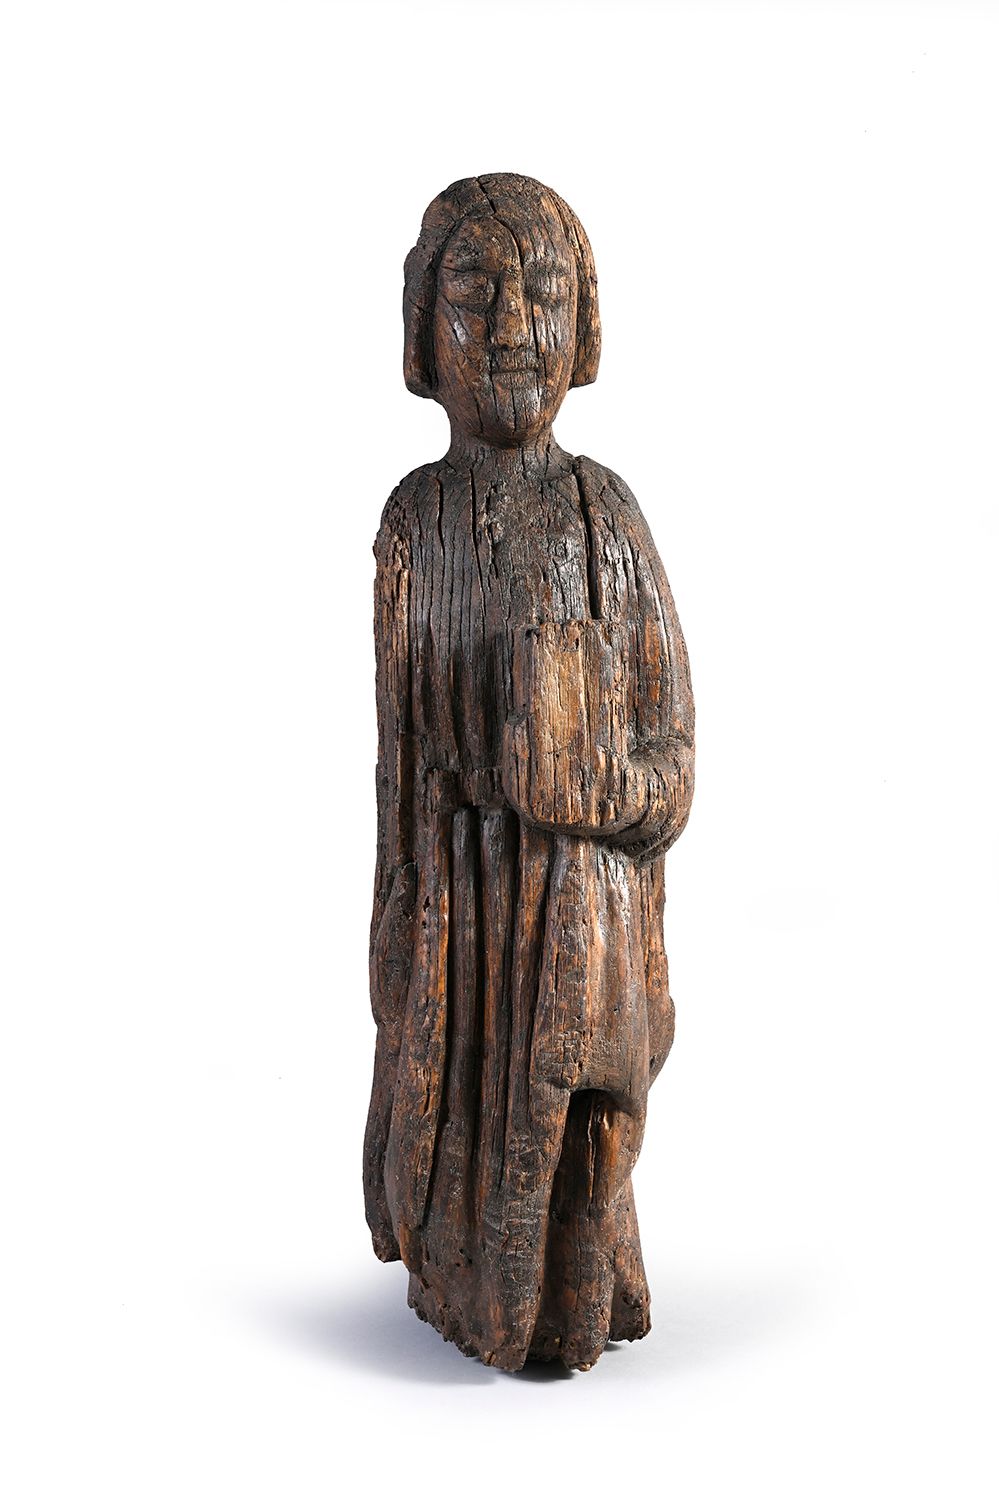 Null Saint John in carved oak. Standing, he holds a book in his left hand.
Spain&hellip;